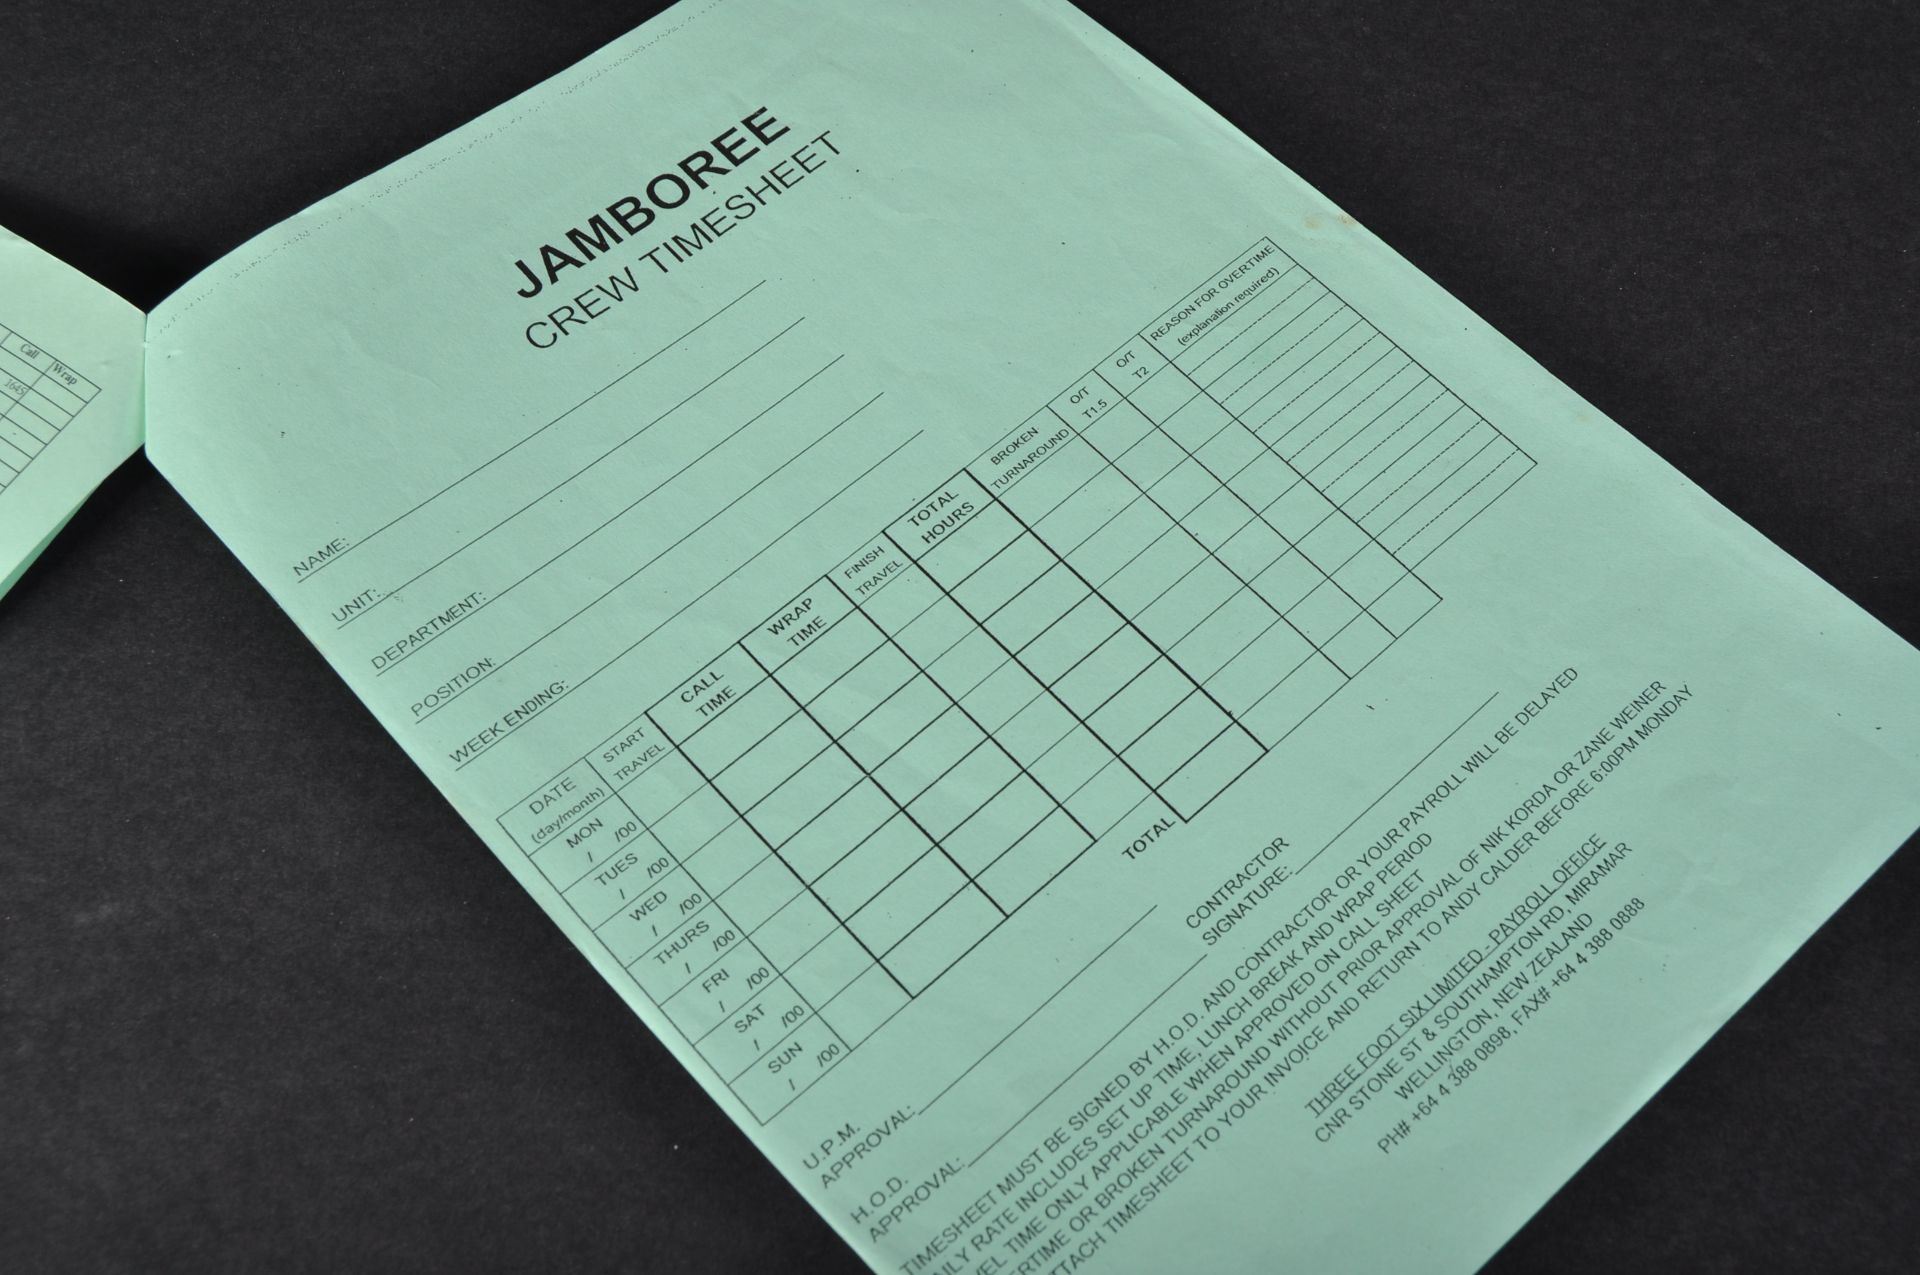 LORD OF THE RINGS - PRODUCTION USED "JAMBOREE" CALL SHEET - Image 7 of 7